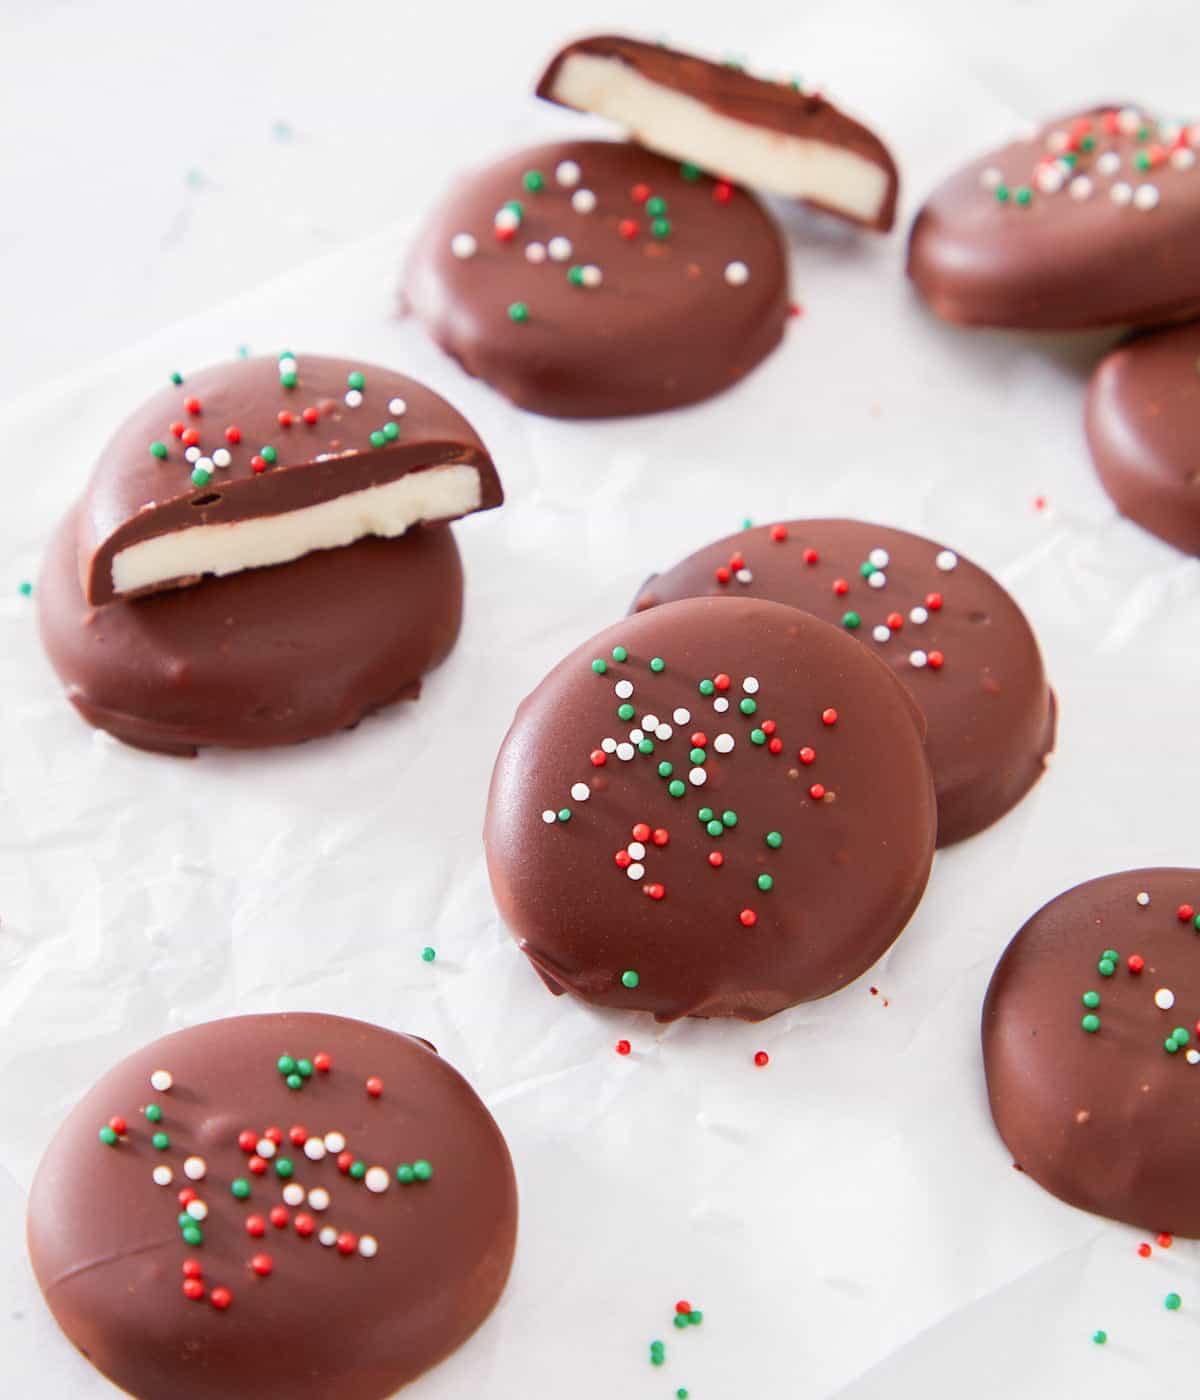 Multiple pieces of peppermint patties on a white surface with red, white, and green sprinkles on top. Some pieces are cut in half.